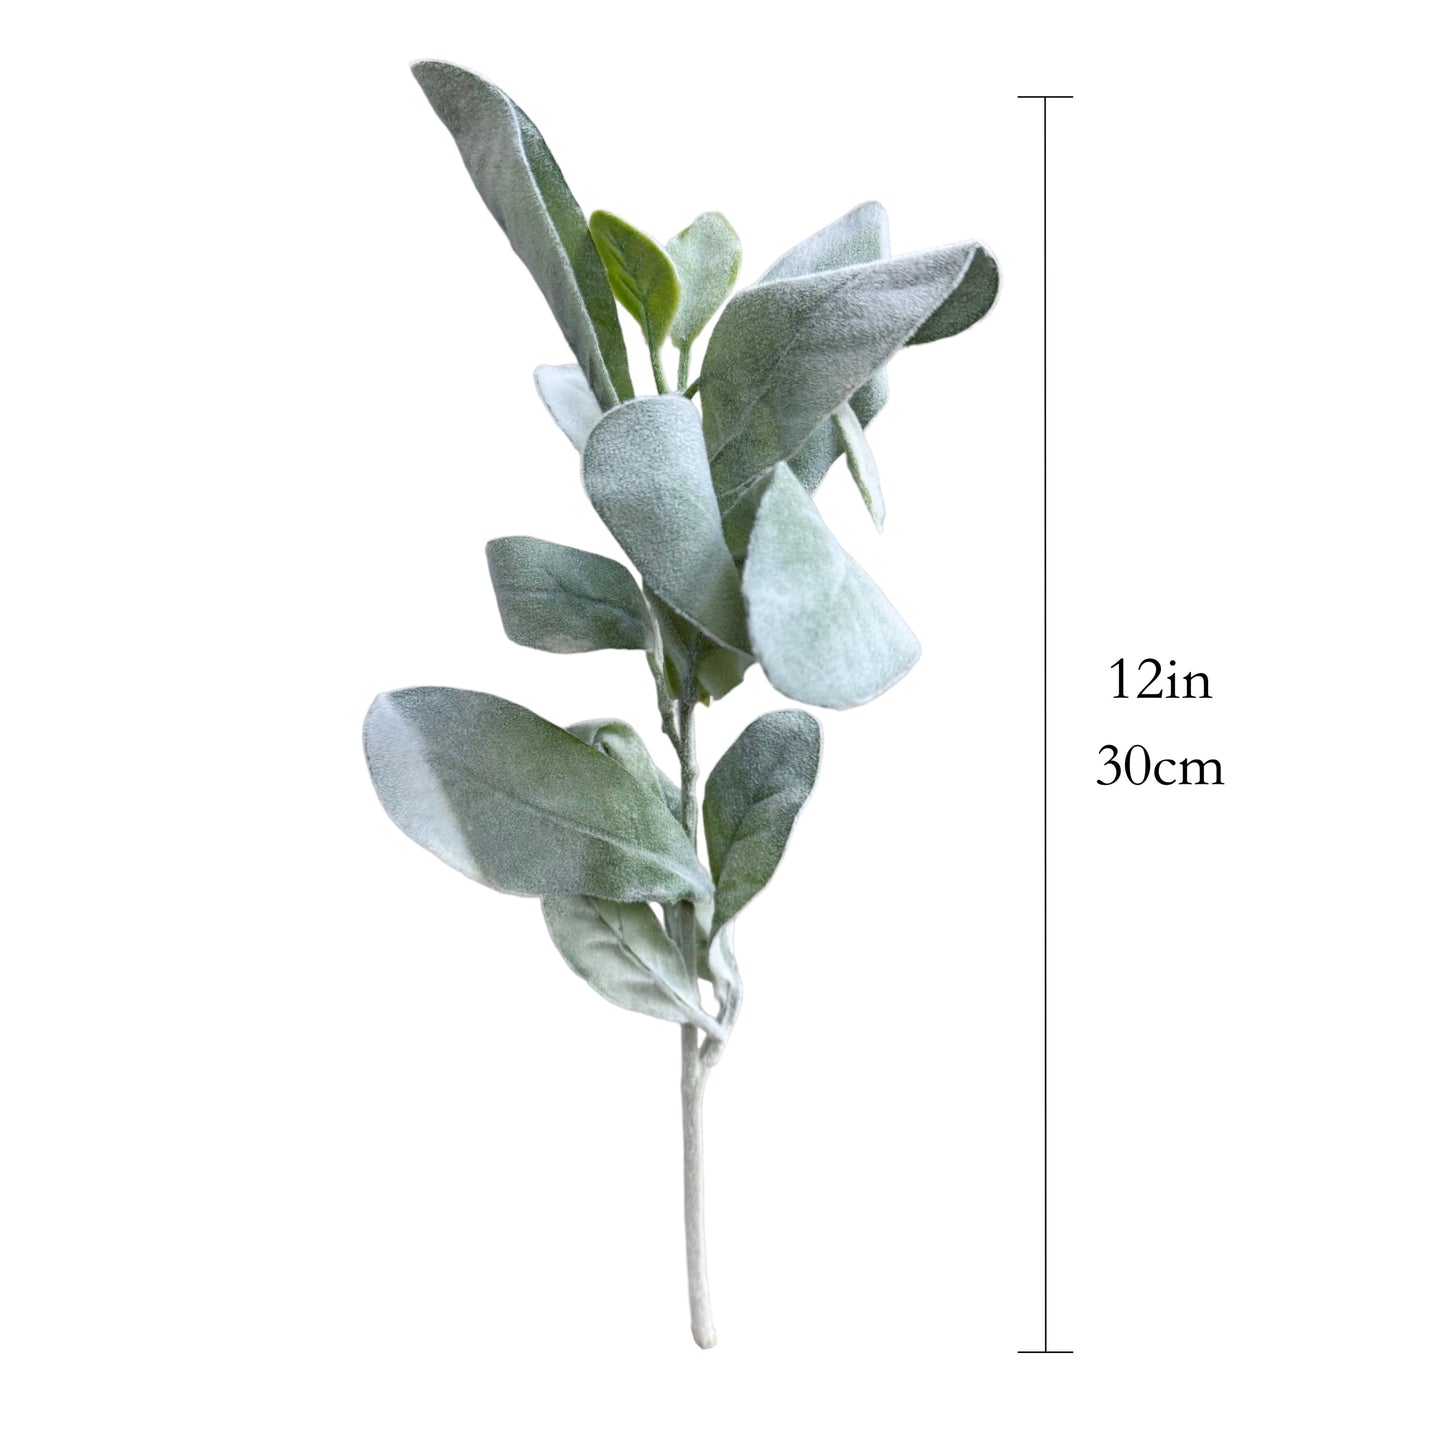 Set of 6 Flexible Fabric Lamb's Ear Stems, with 15 Leaves